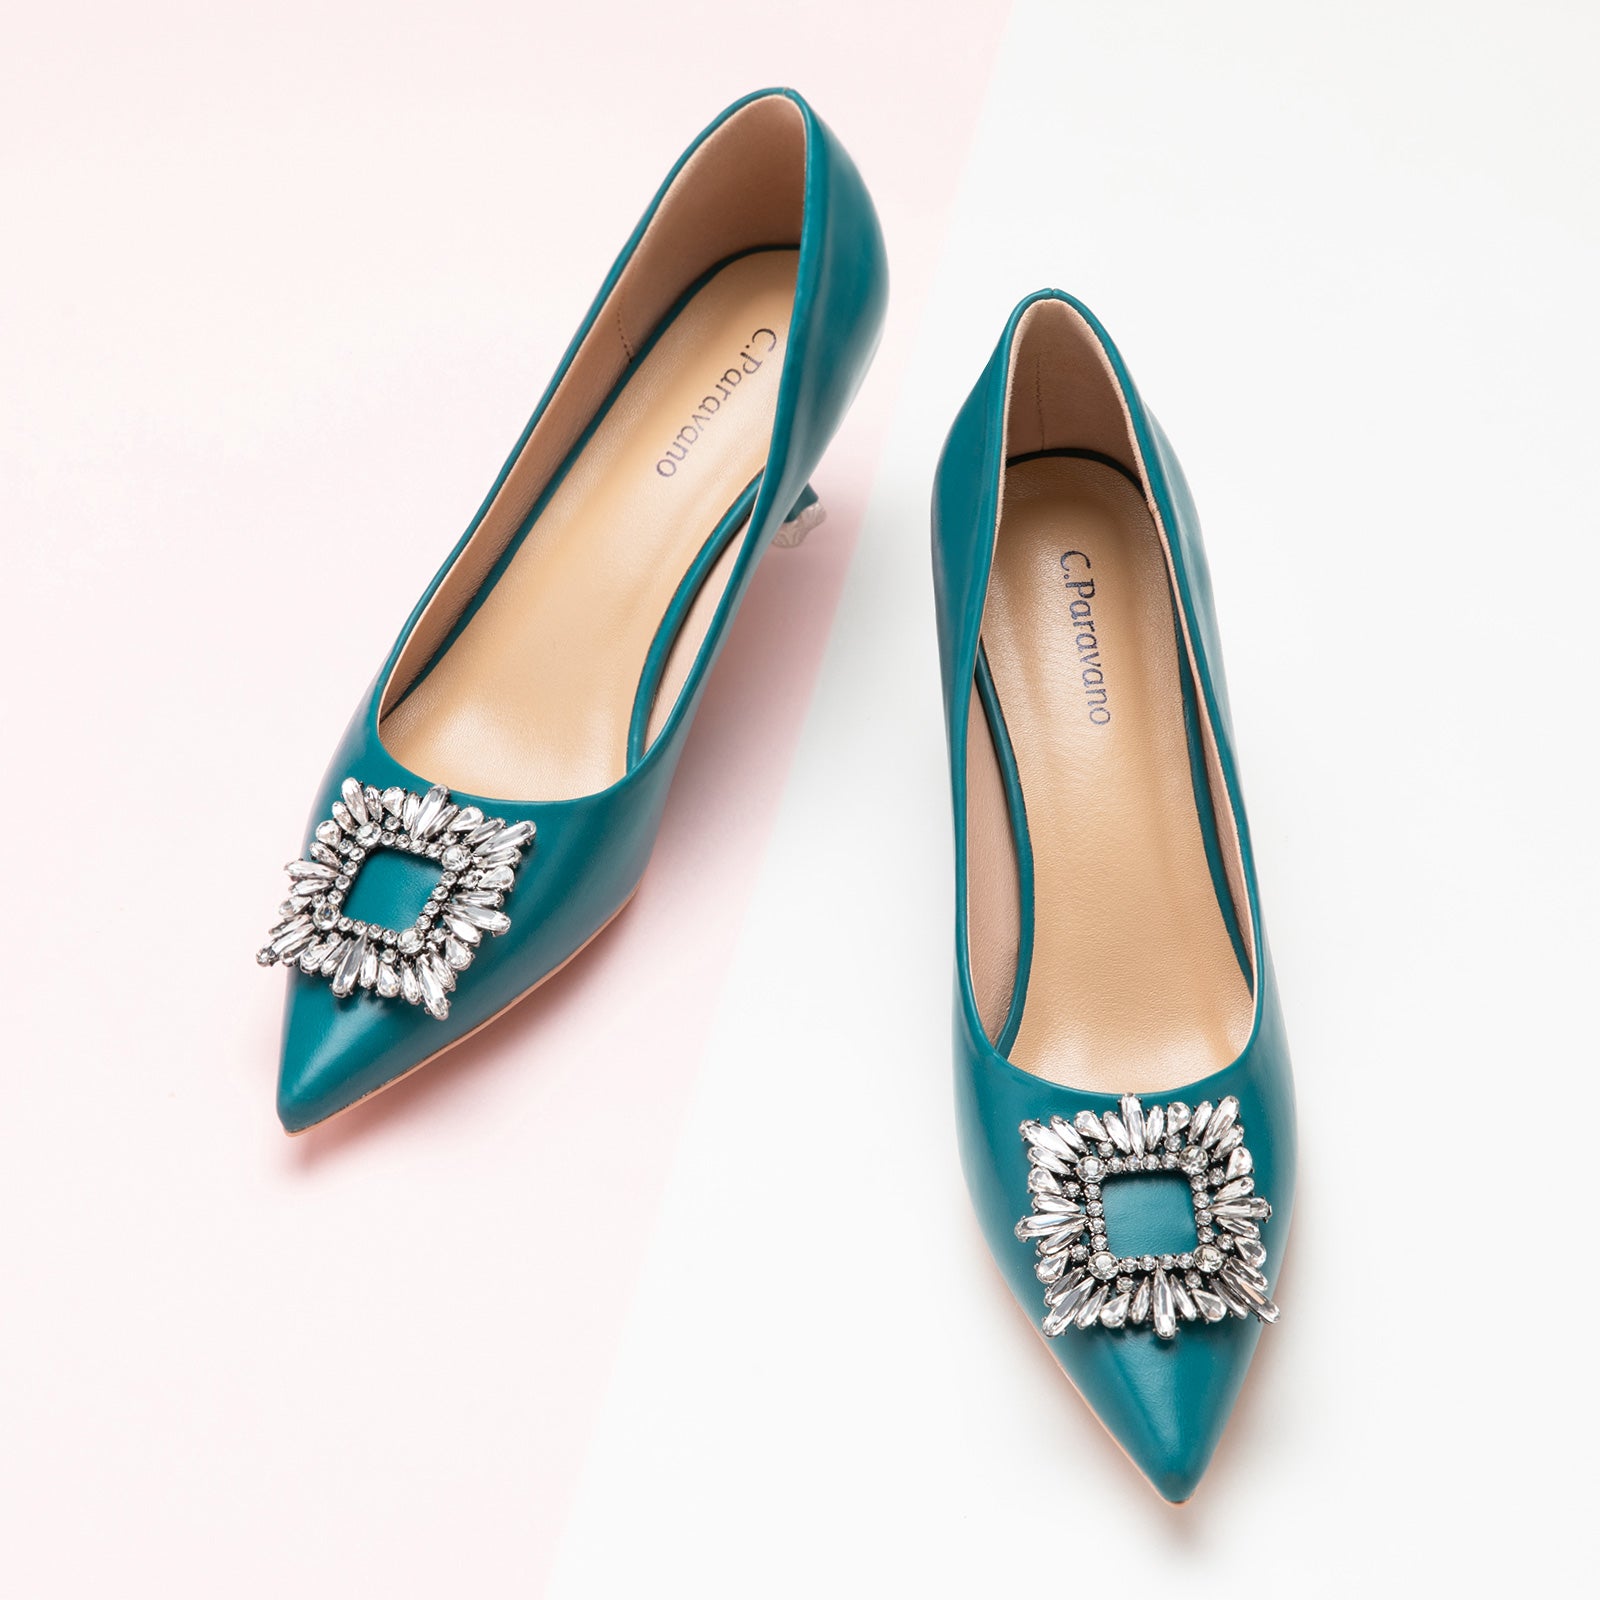 Peacock Blue Crystal Embellished Women Buckle Pumps: Classic and Versatile